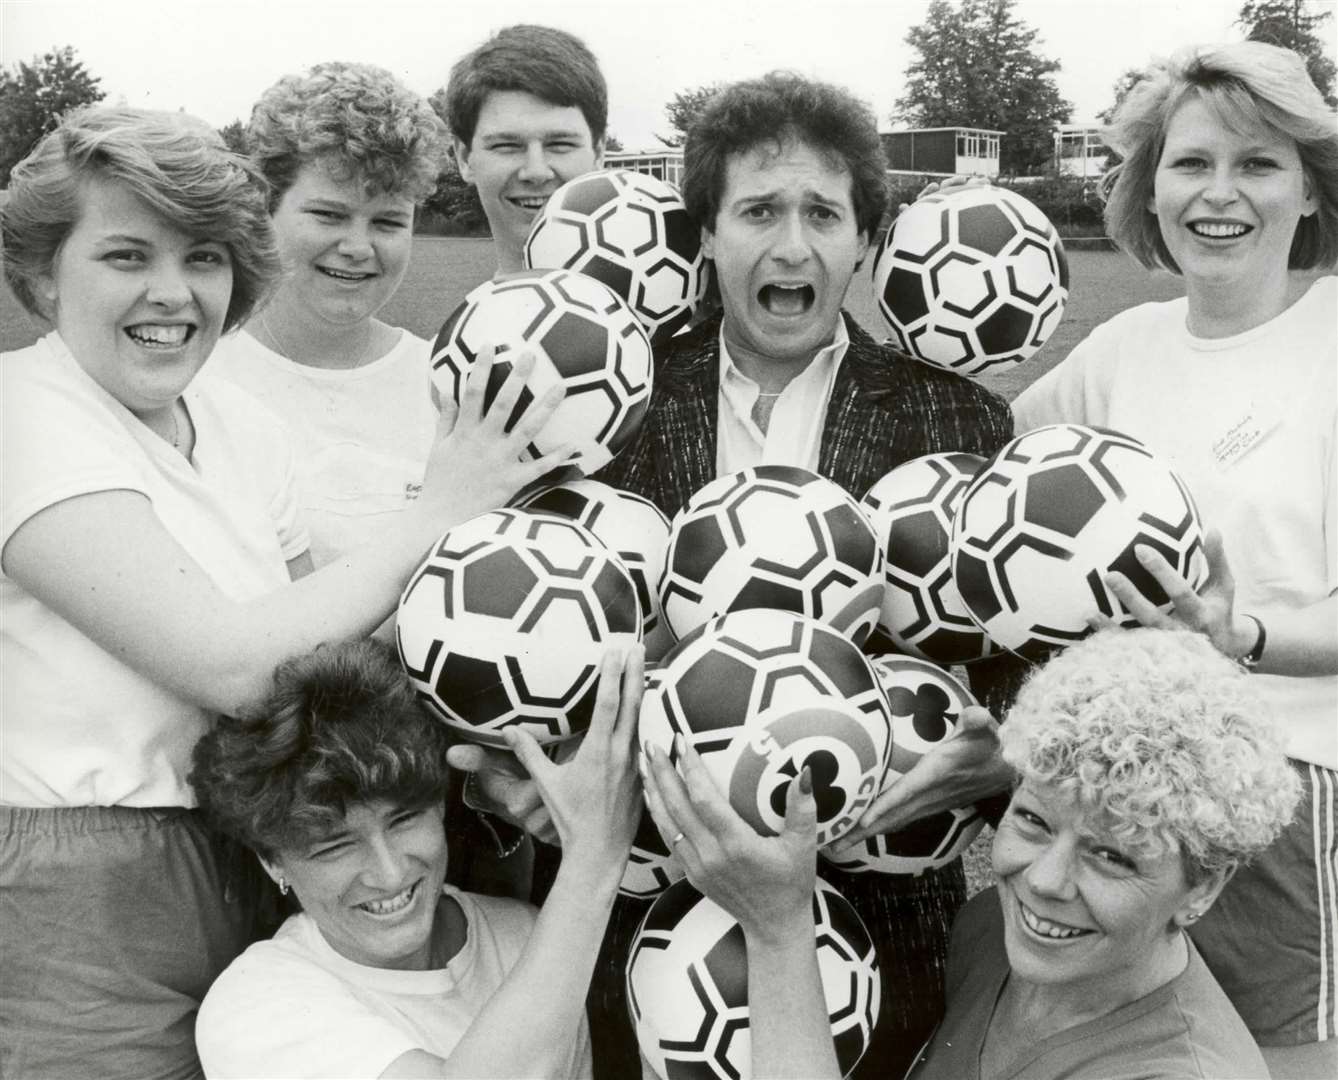 TV presenter, Bill Buckley, with the ladies of East Malling Slimming Club at a charity fun day in June 1988